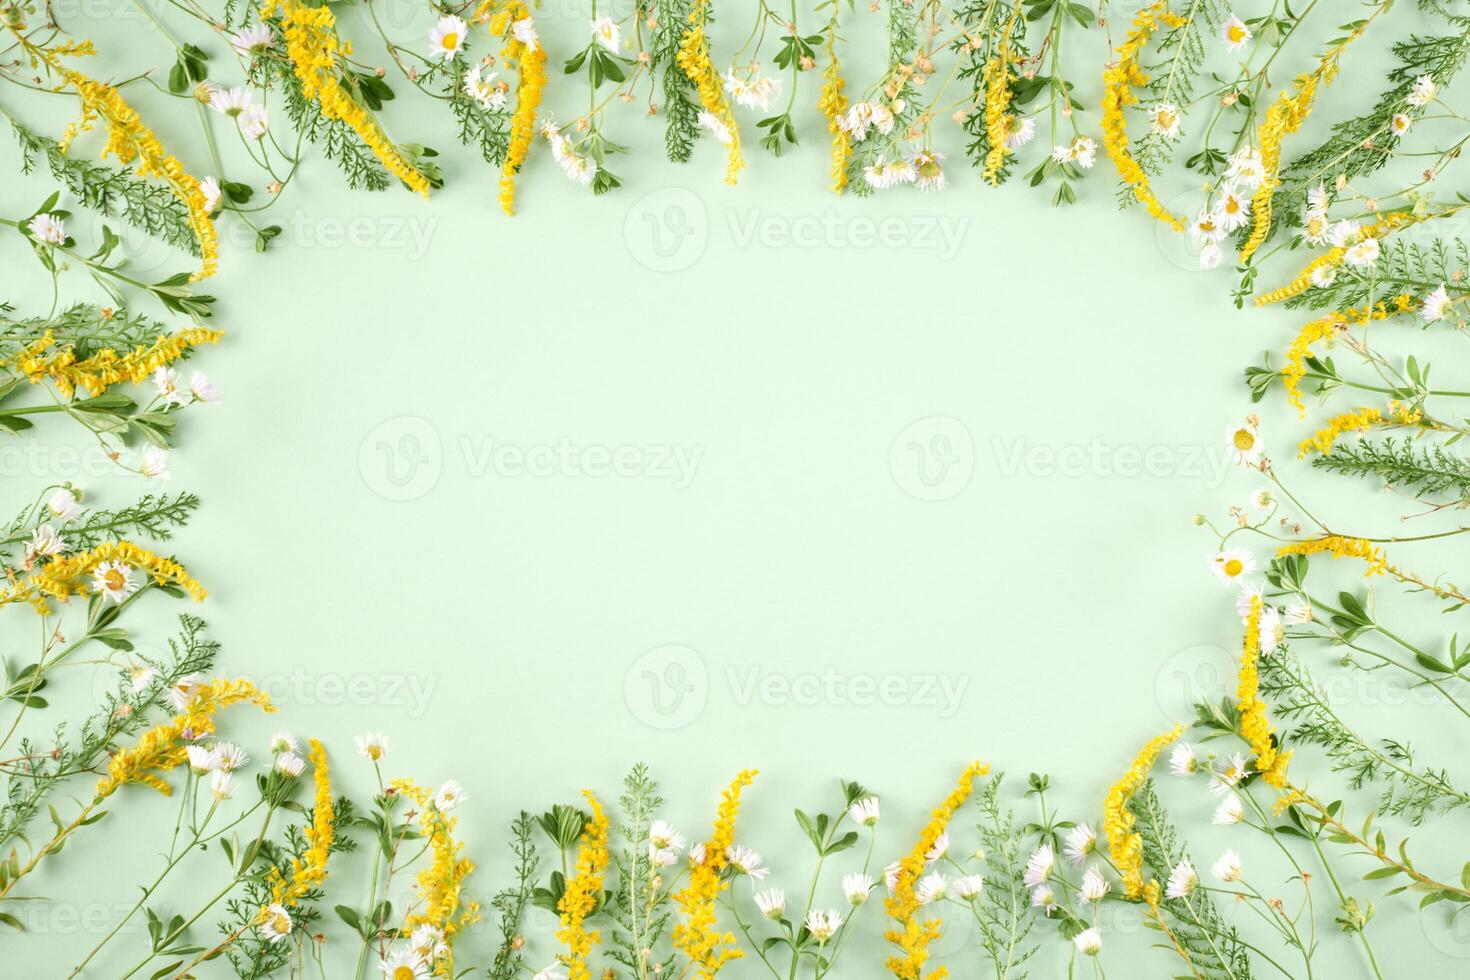 Green grass with little yellow and white flowers as oval frame on light green background photo